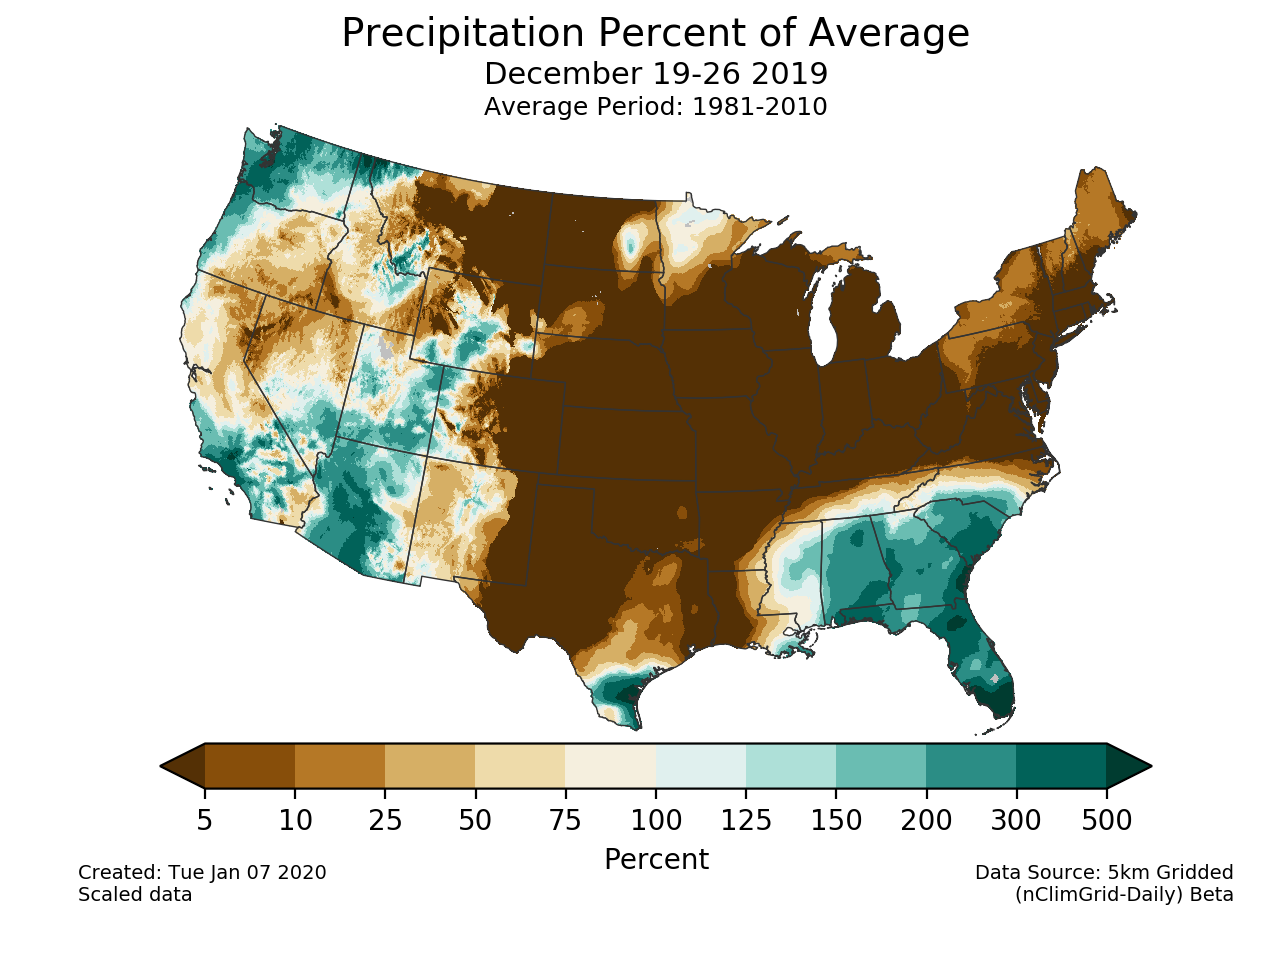 Precipitation anomalies (percent of normal) for the CONUS for December 19-26 2019